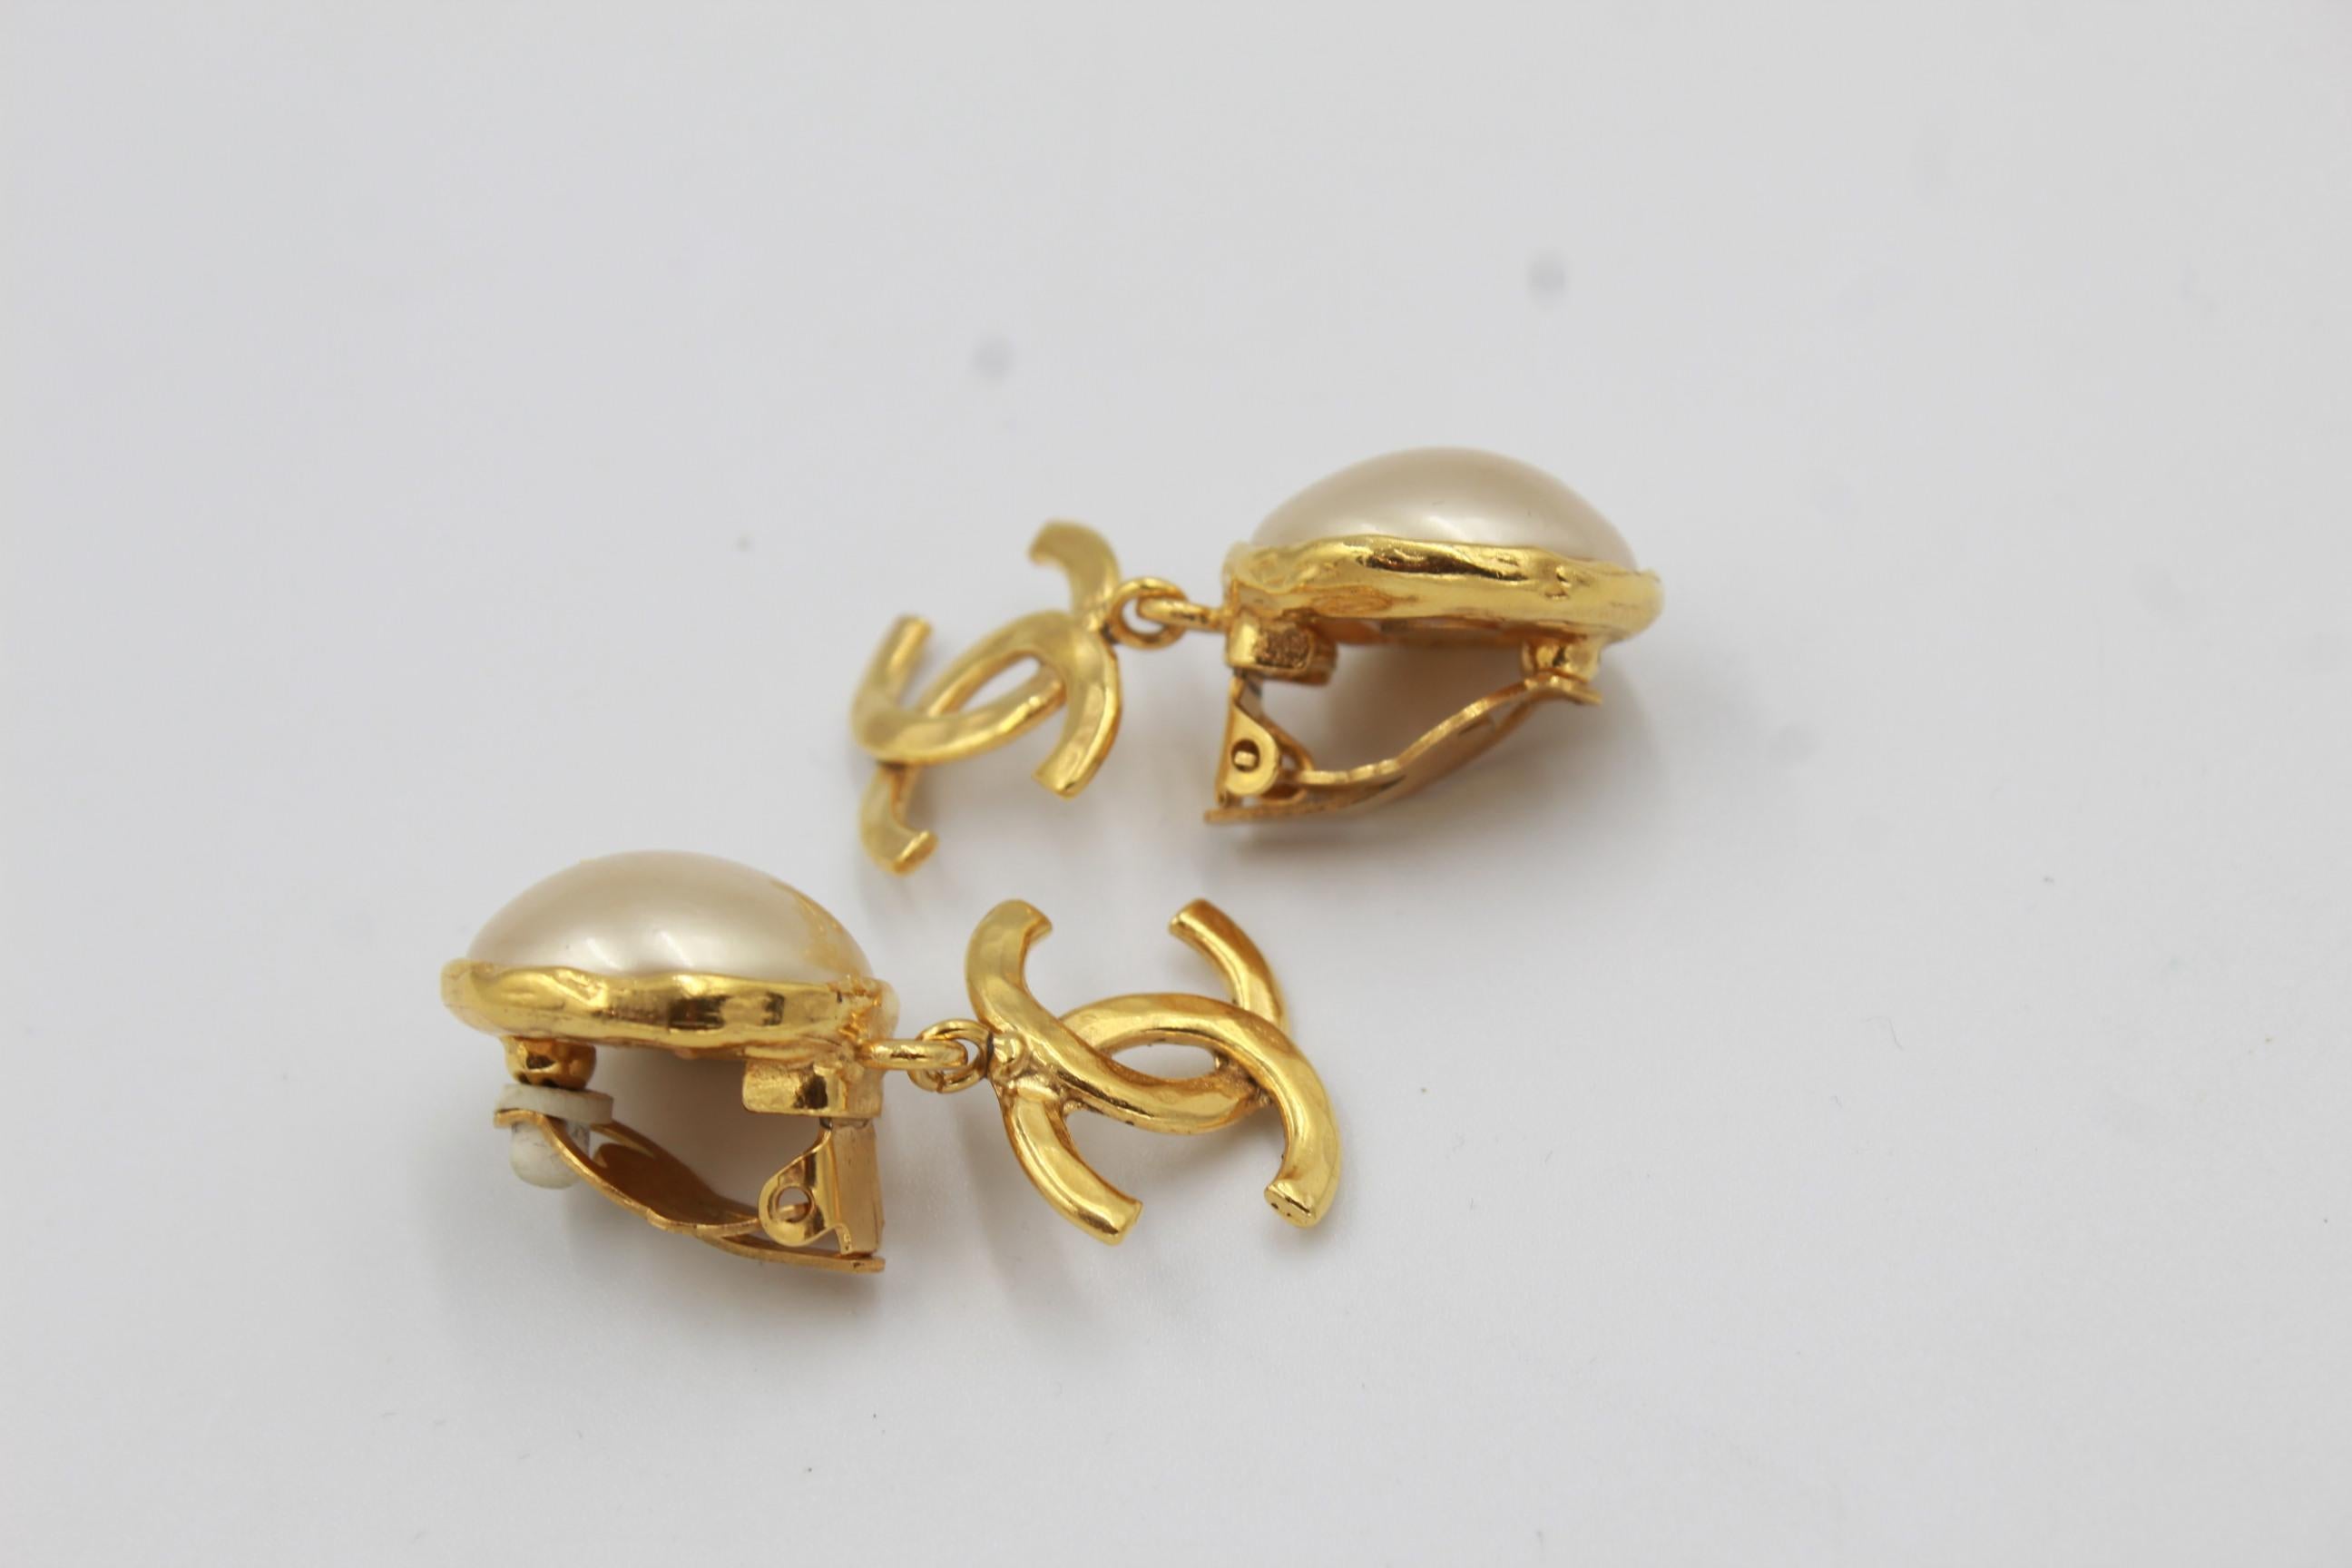 Women's or Men's Vintage Chanel earring in gold metal and pearl